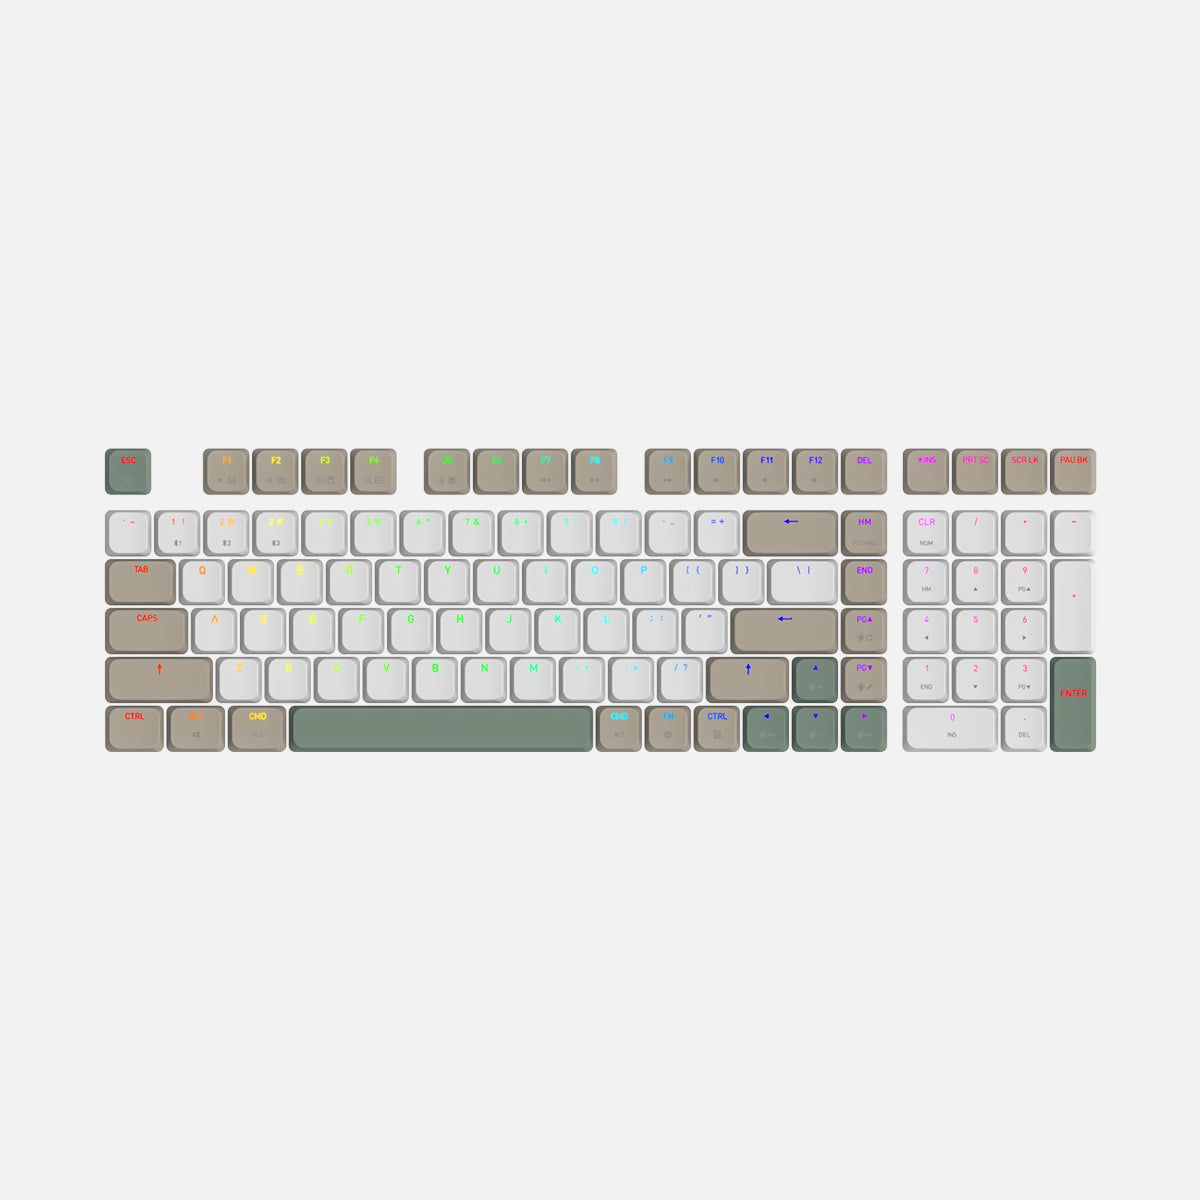 Bosslanke keycaps - 98% lay-out